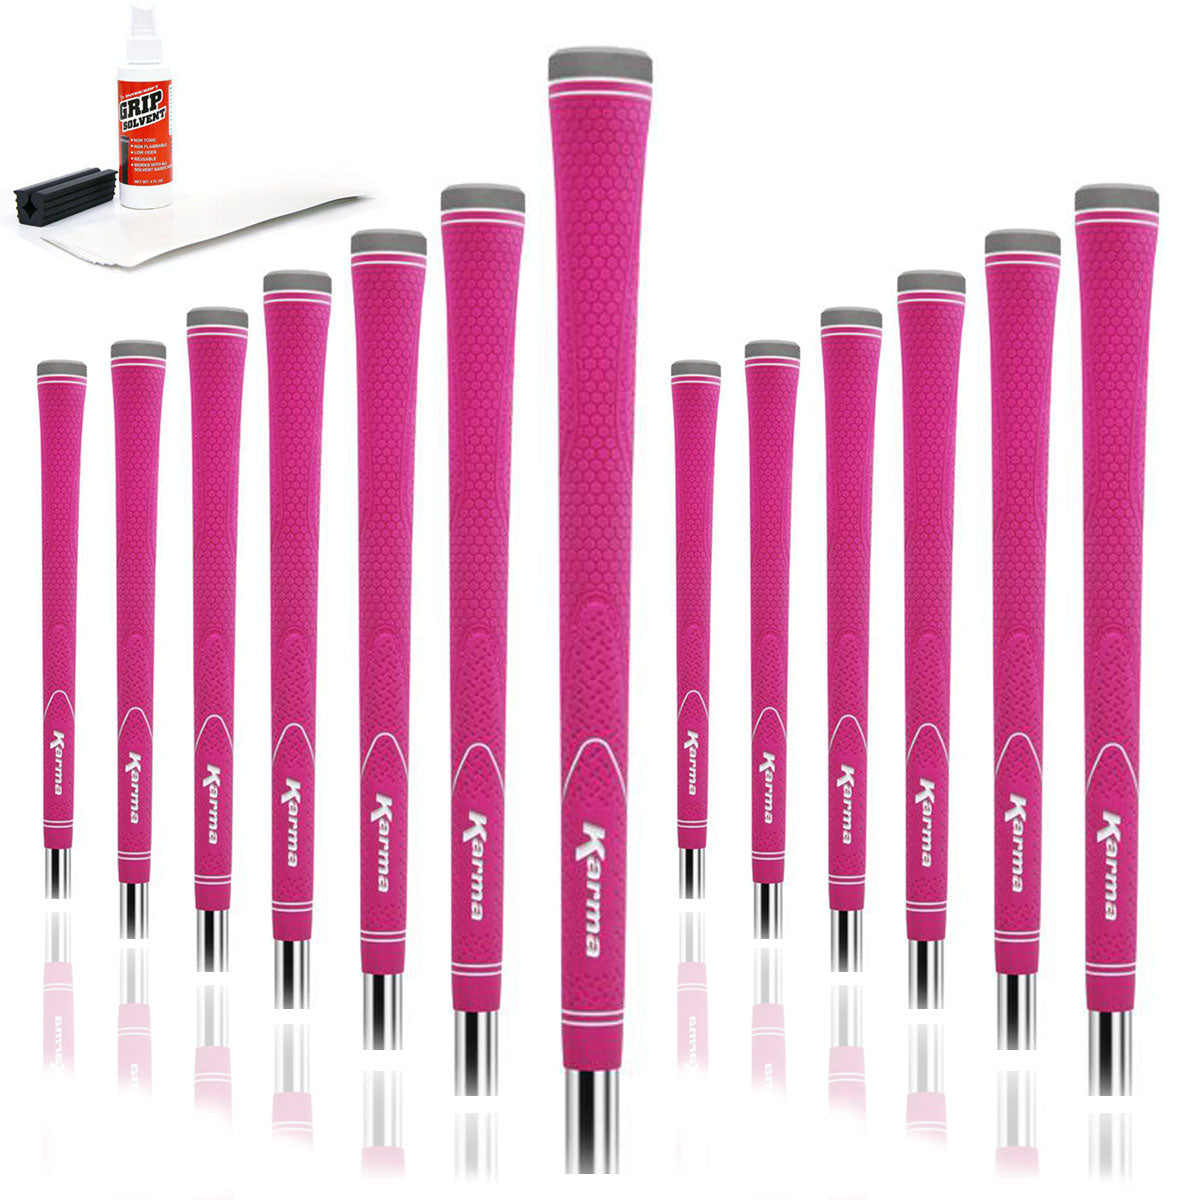 13 Karma Neion II pink golf grips, golf grip tape strips, bottle of grip solvent and rubber shaft clamp